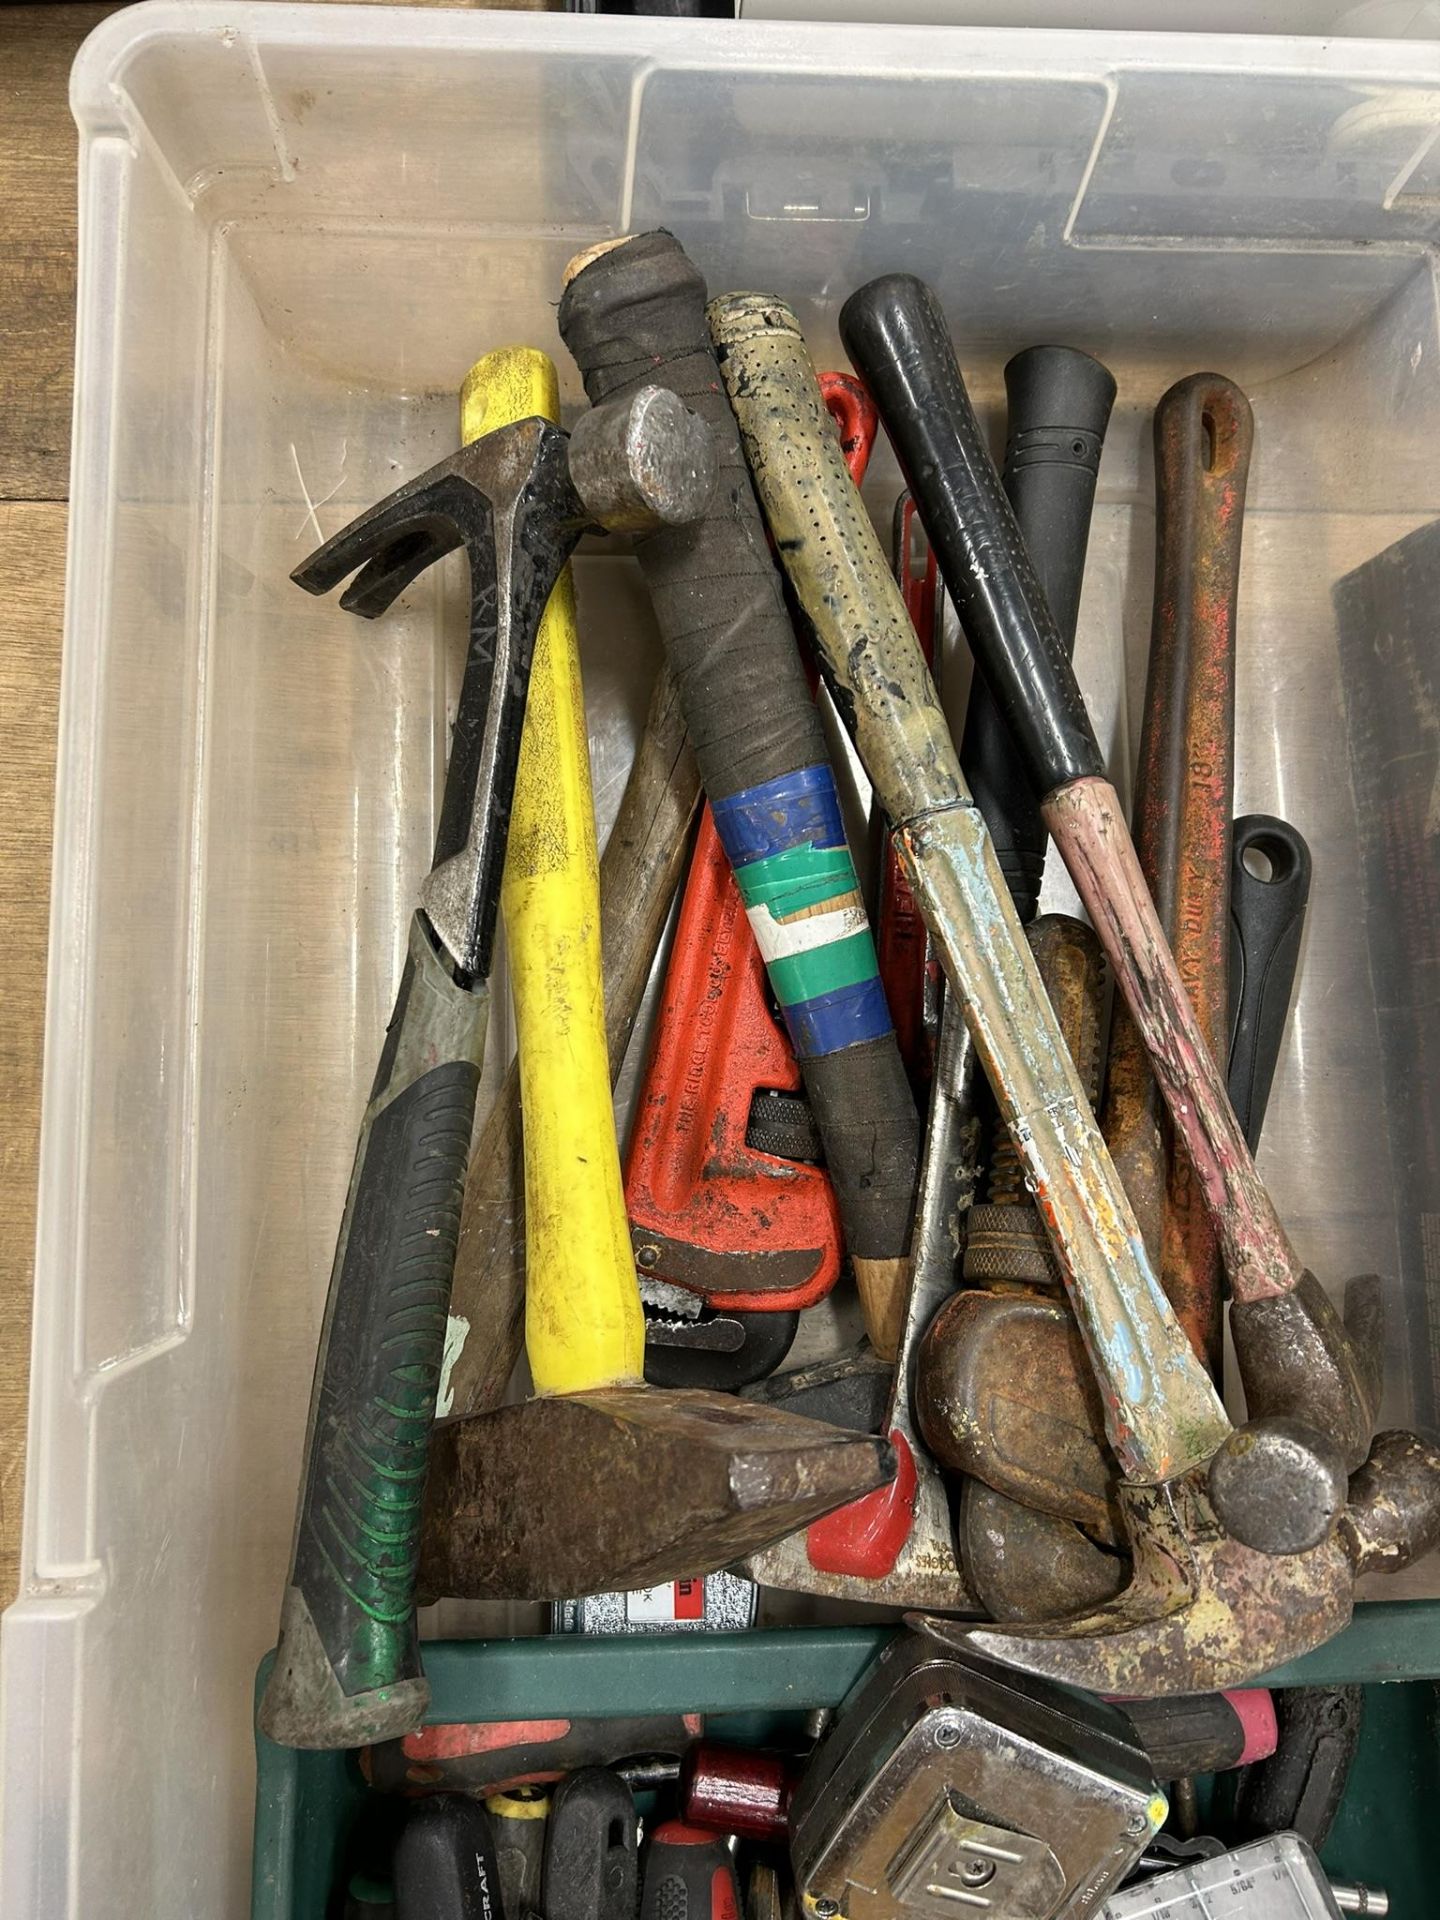 L/O ASSORTED HAMMERS, SCREWDRIVERS, PIPE WRENCHES, ETC. - Image 3 of 3